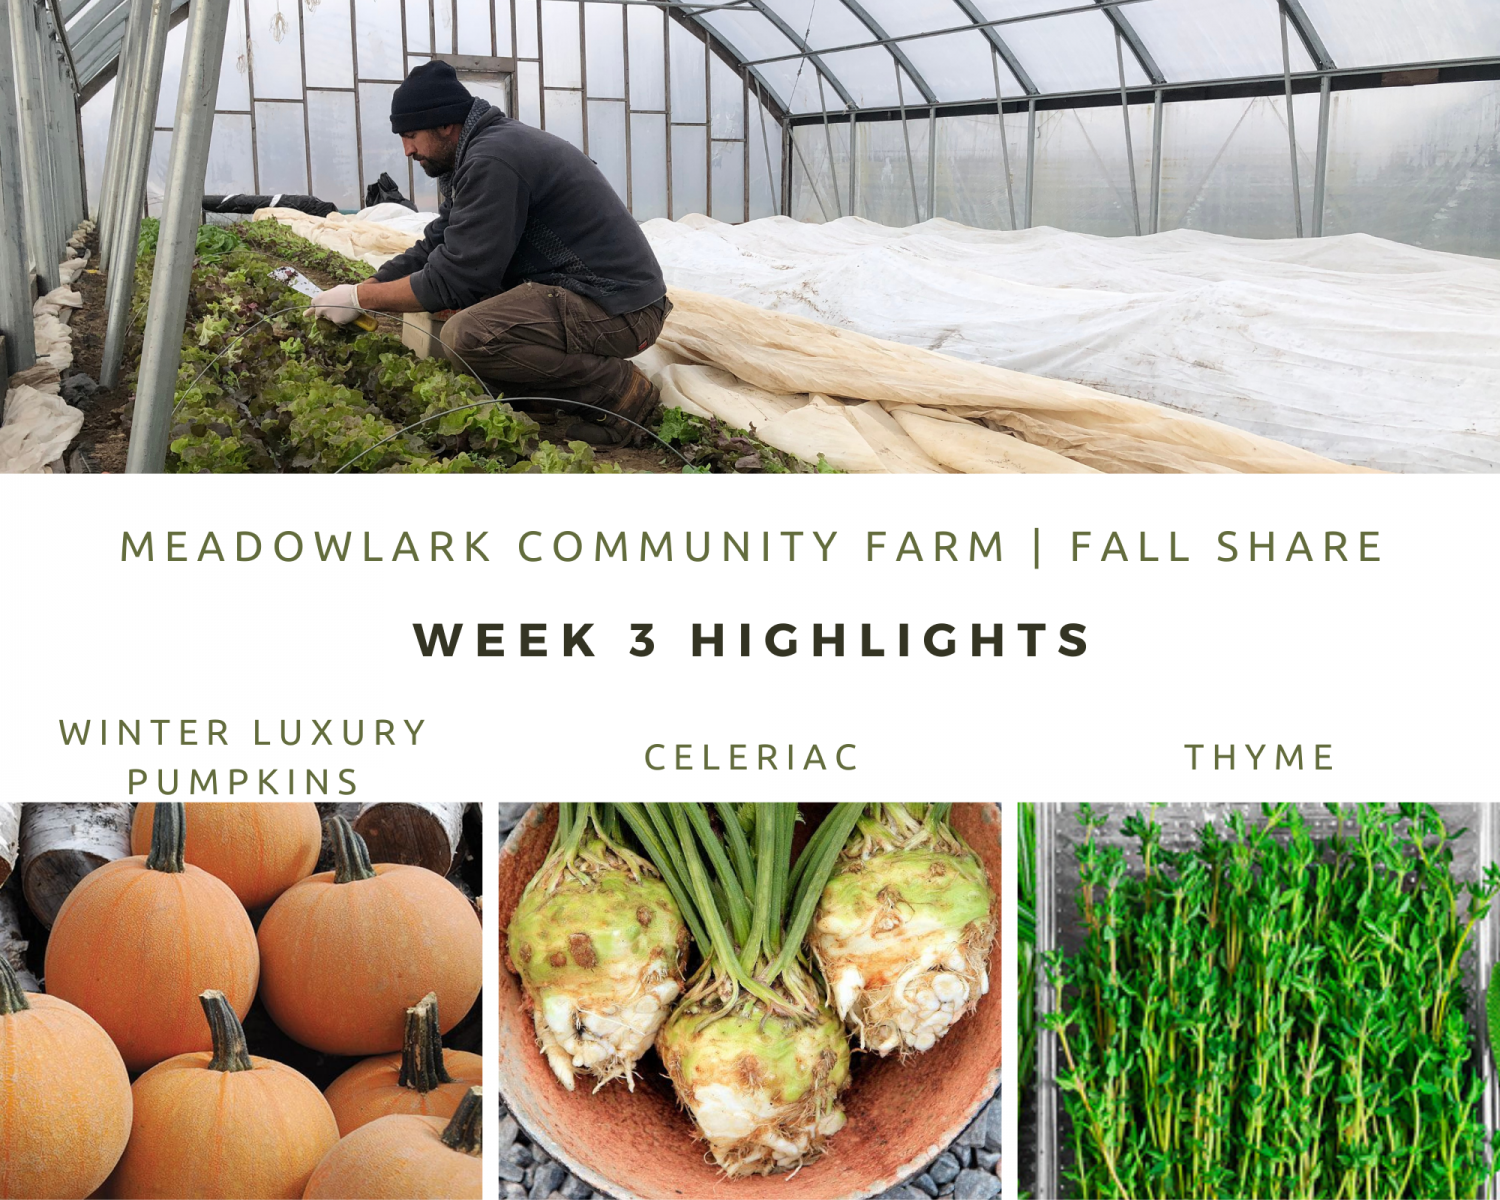 Previous Happening: Fall Share: Week 3